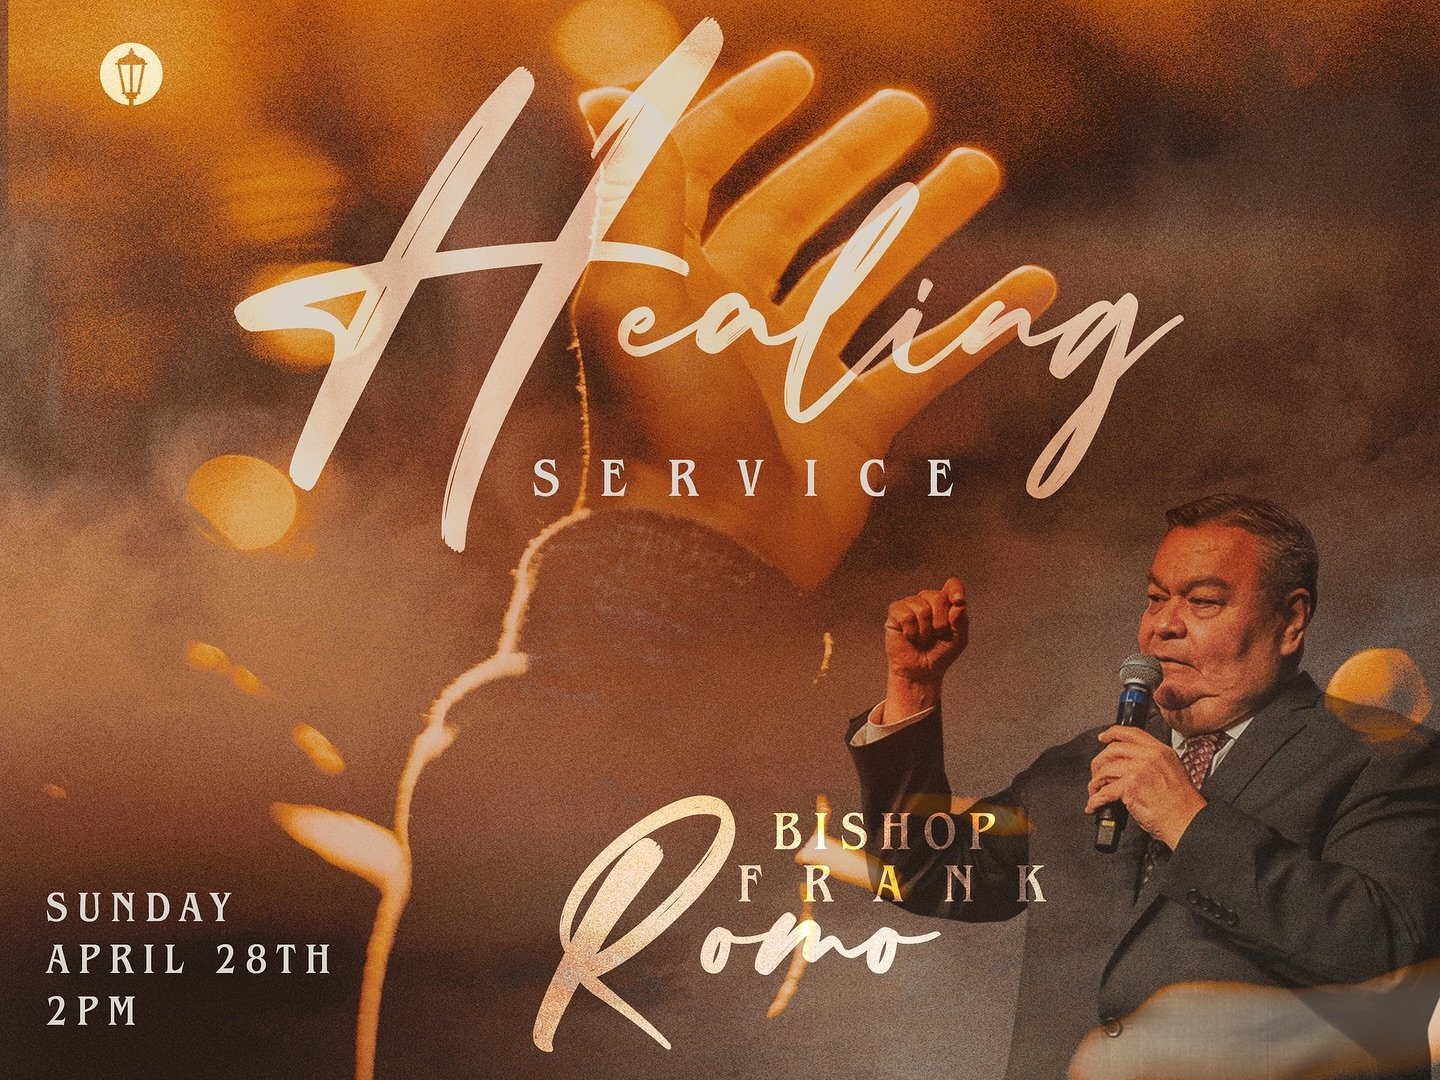 If you&rsquo;re in need of a healing, today is your day to receive it! We invite you to join us today for our special Healing Service at @citylight_church with our guest speaker, Bishop Frank Romo from Phoenix, AZ. 
 
Whether you need a physical, emo